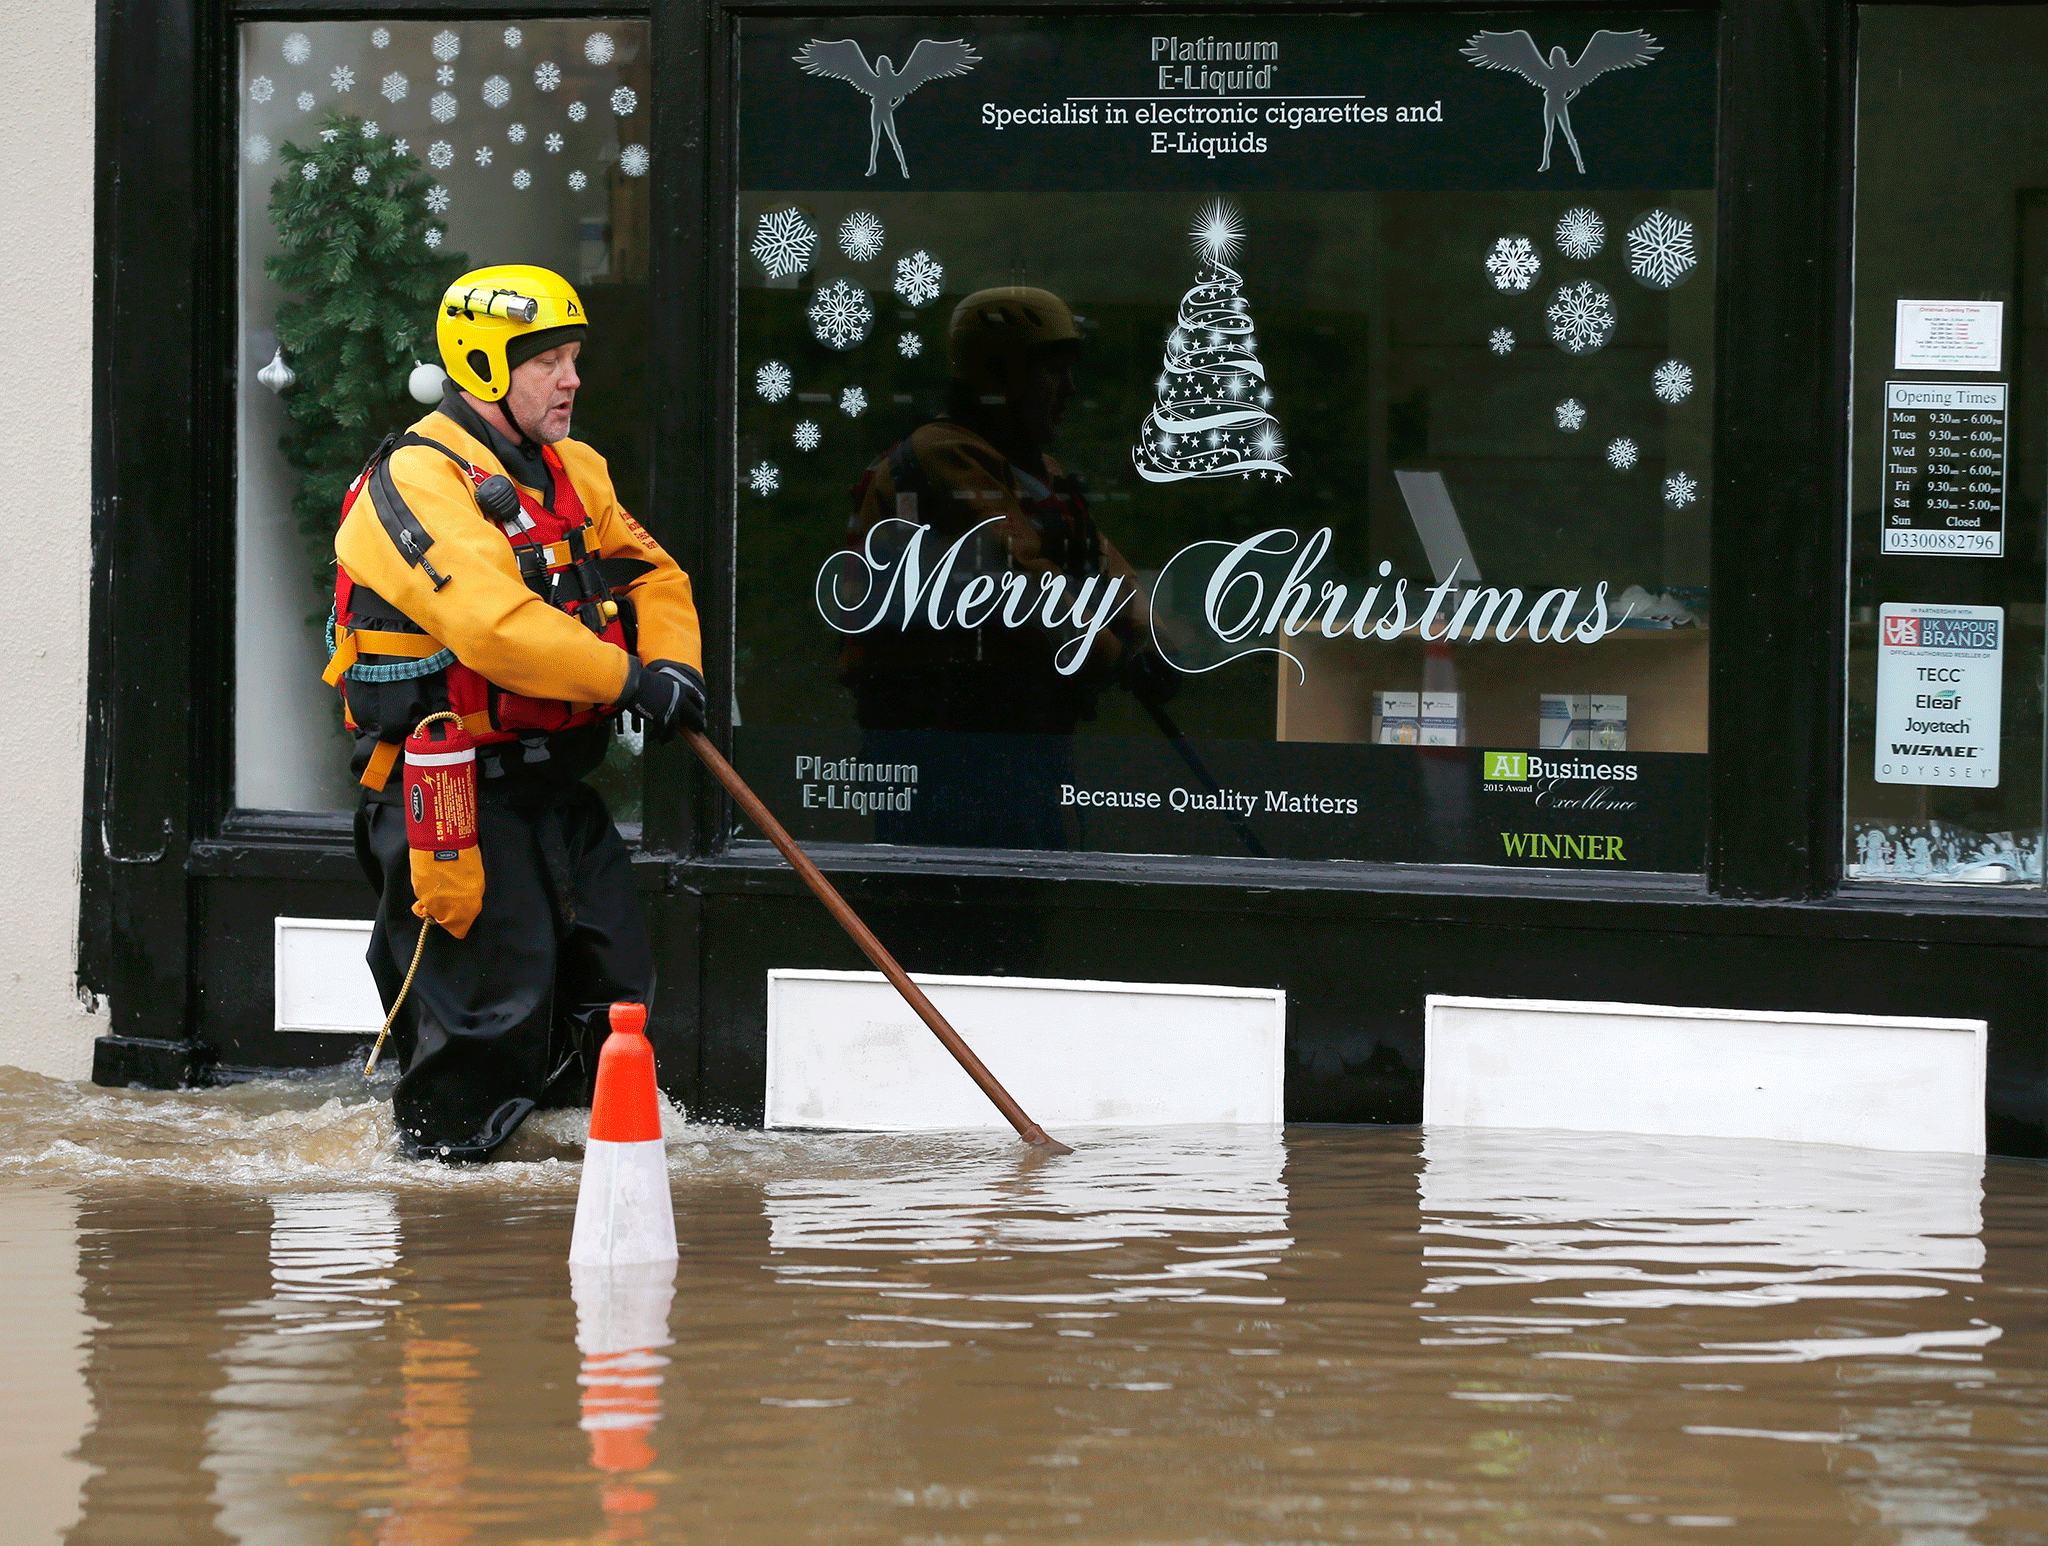 Flood damage in Britain from winter storms last year resulted in claims from more than 15,000 homes and businesses 